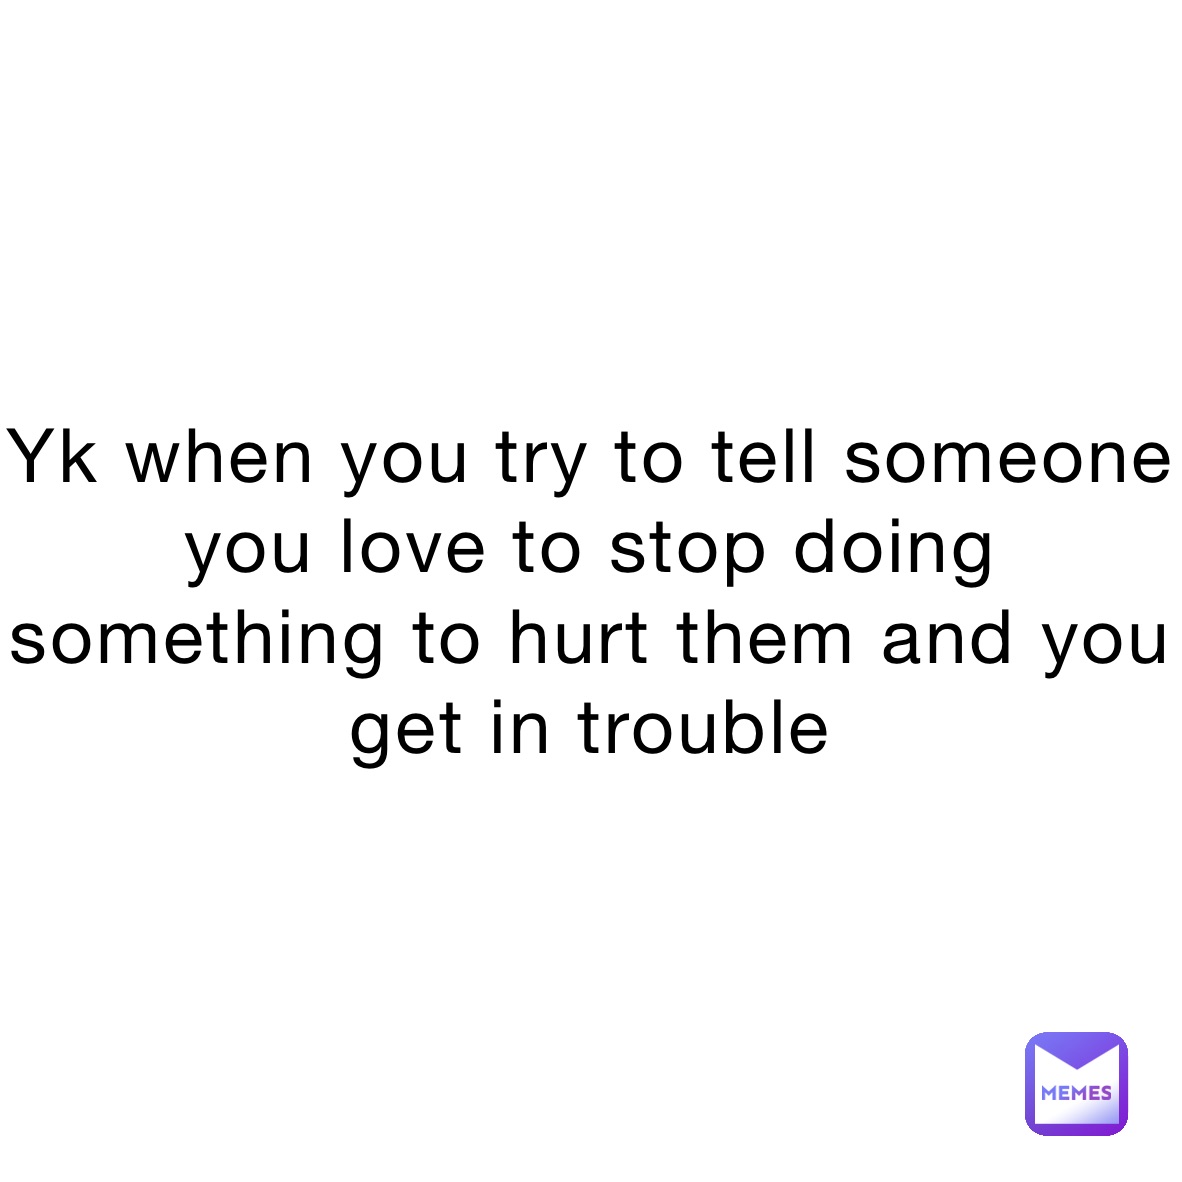 yk-when-you-try-to-tell-someone-you-love-to-stop-doing-something-to